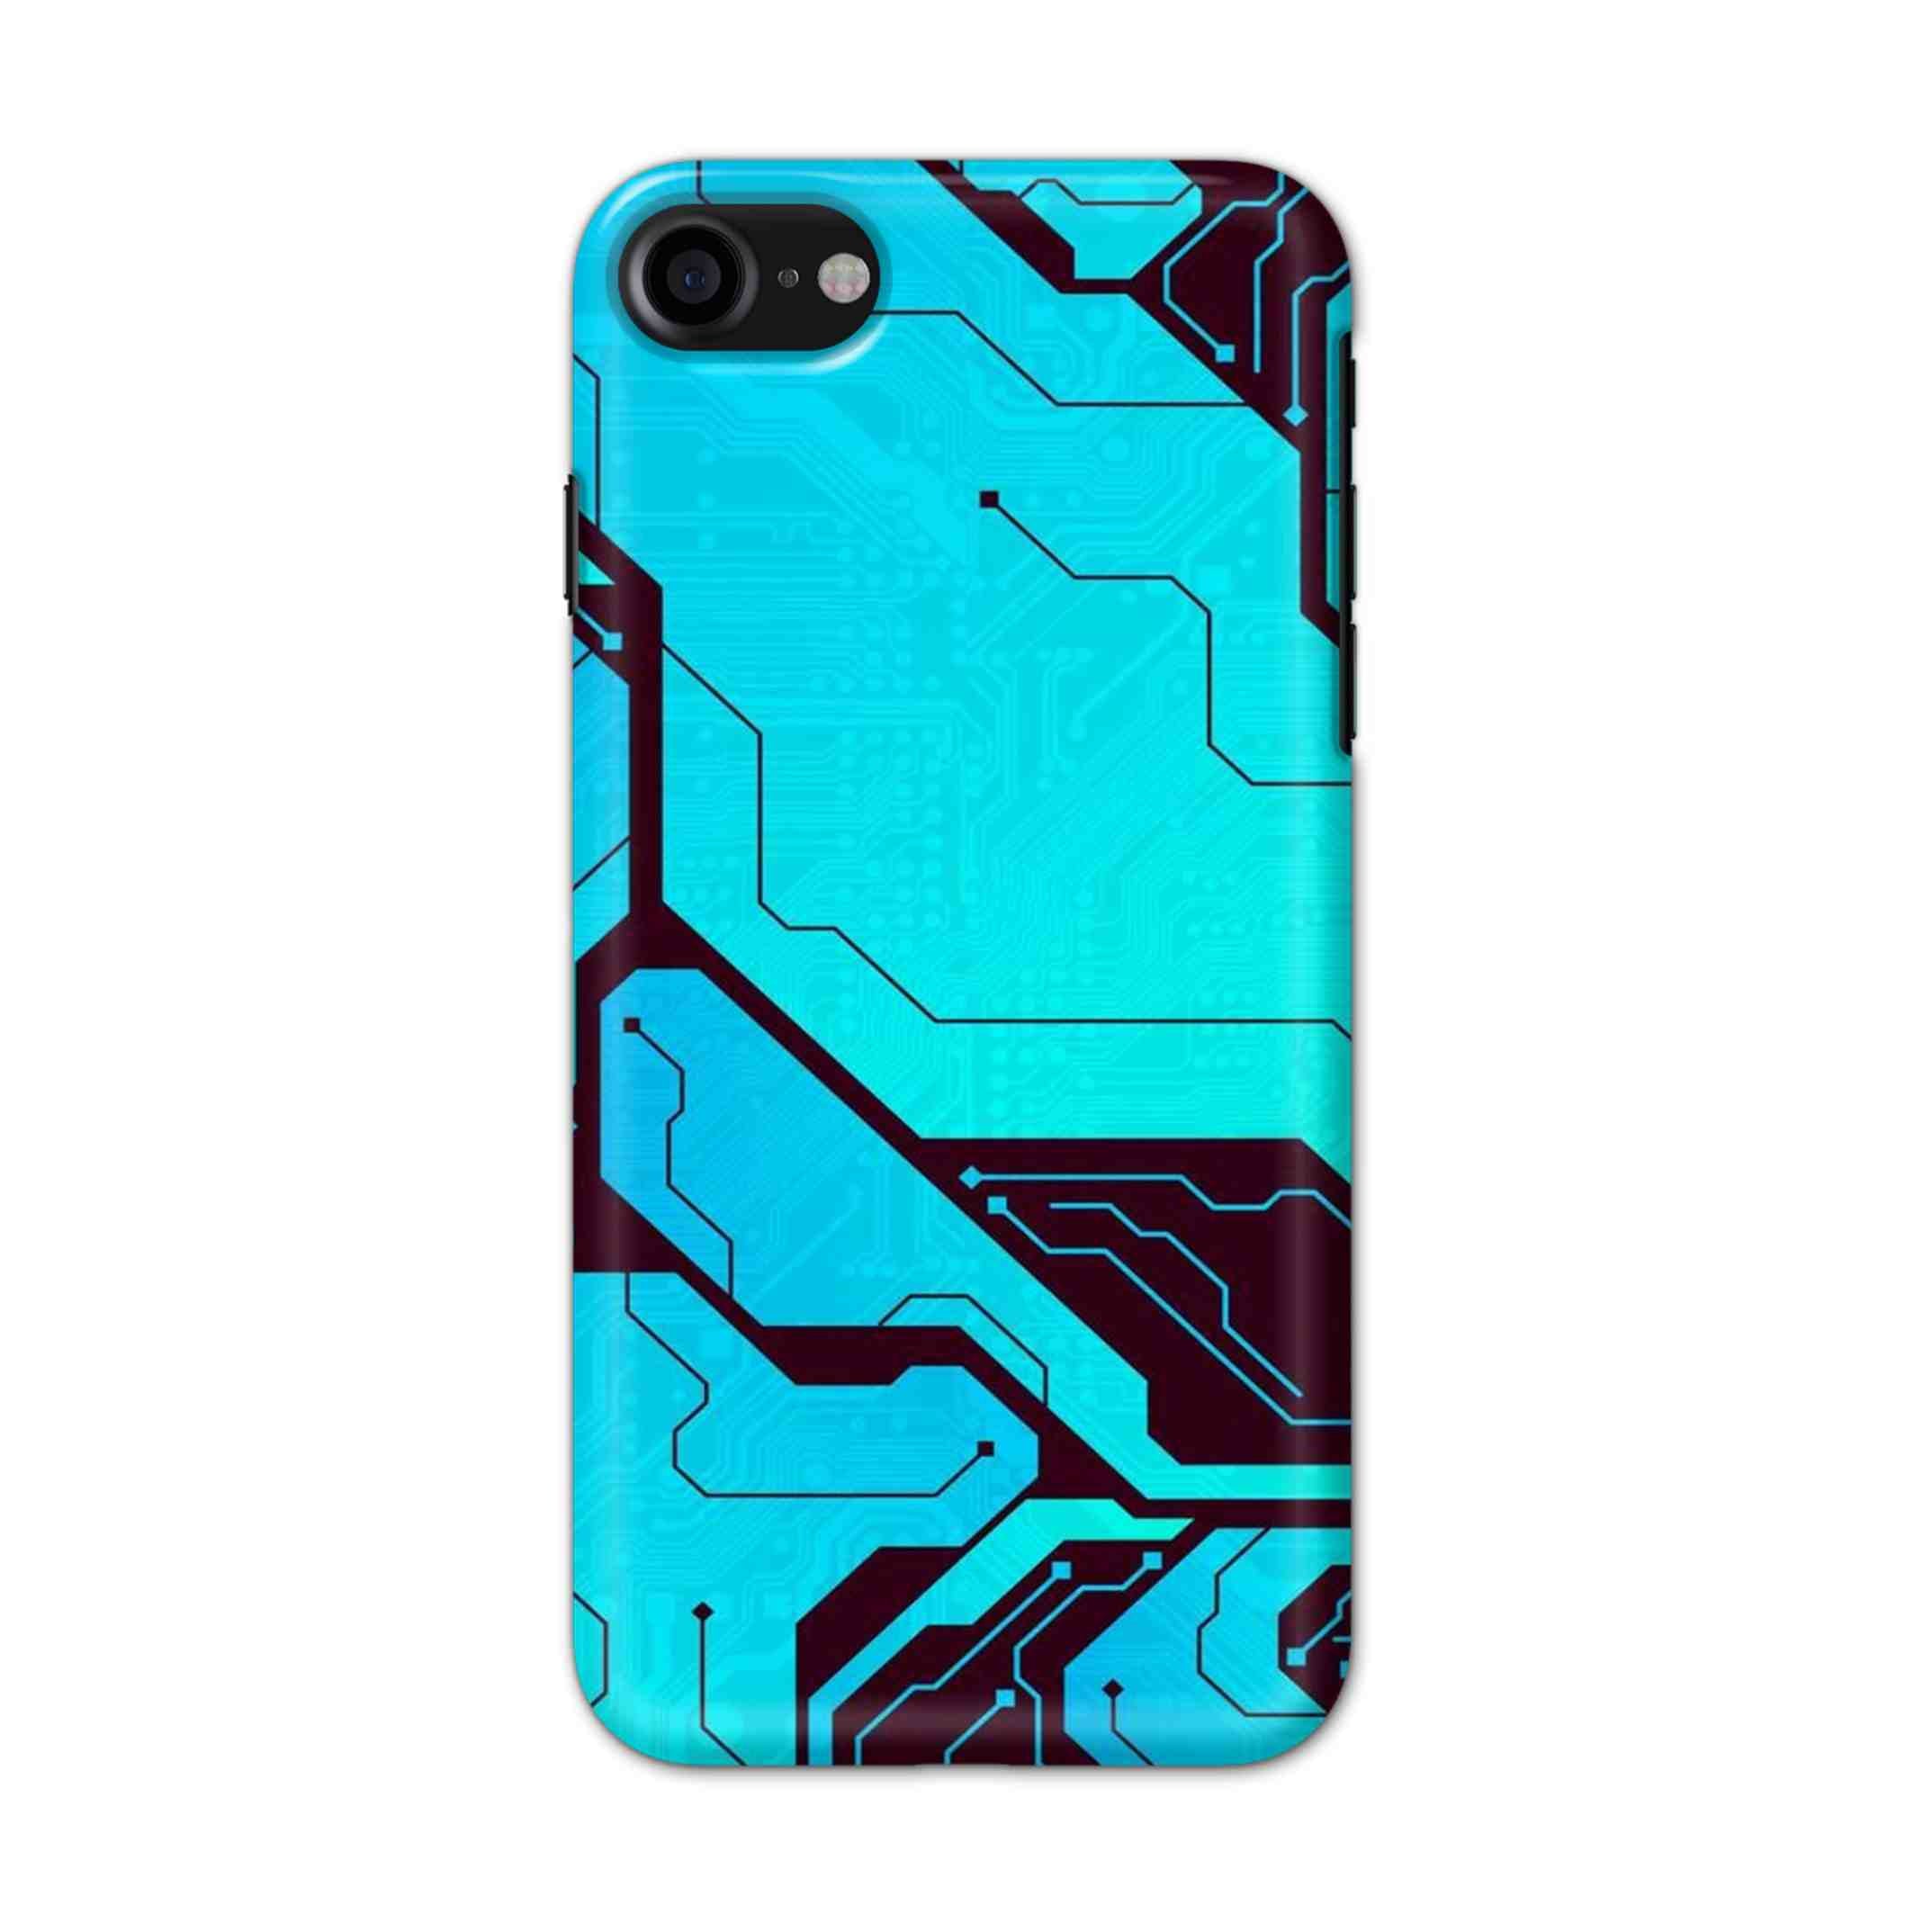 Buy Futuristic Line Hard Back Mobile Phone Case/Cover For iPhone 7 / 8 Online